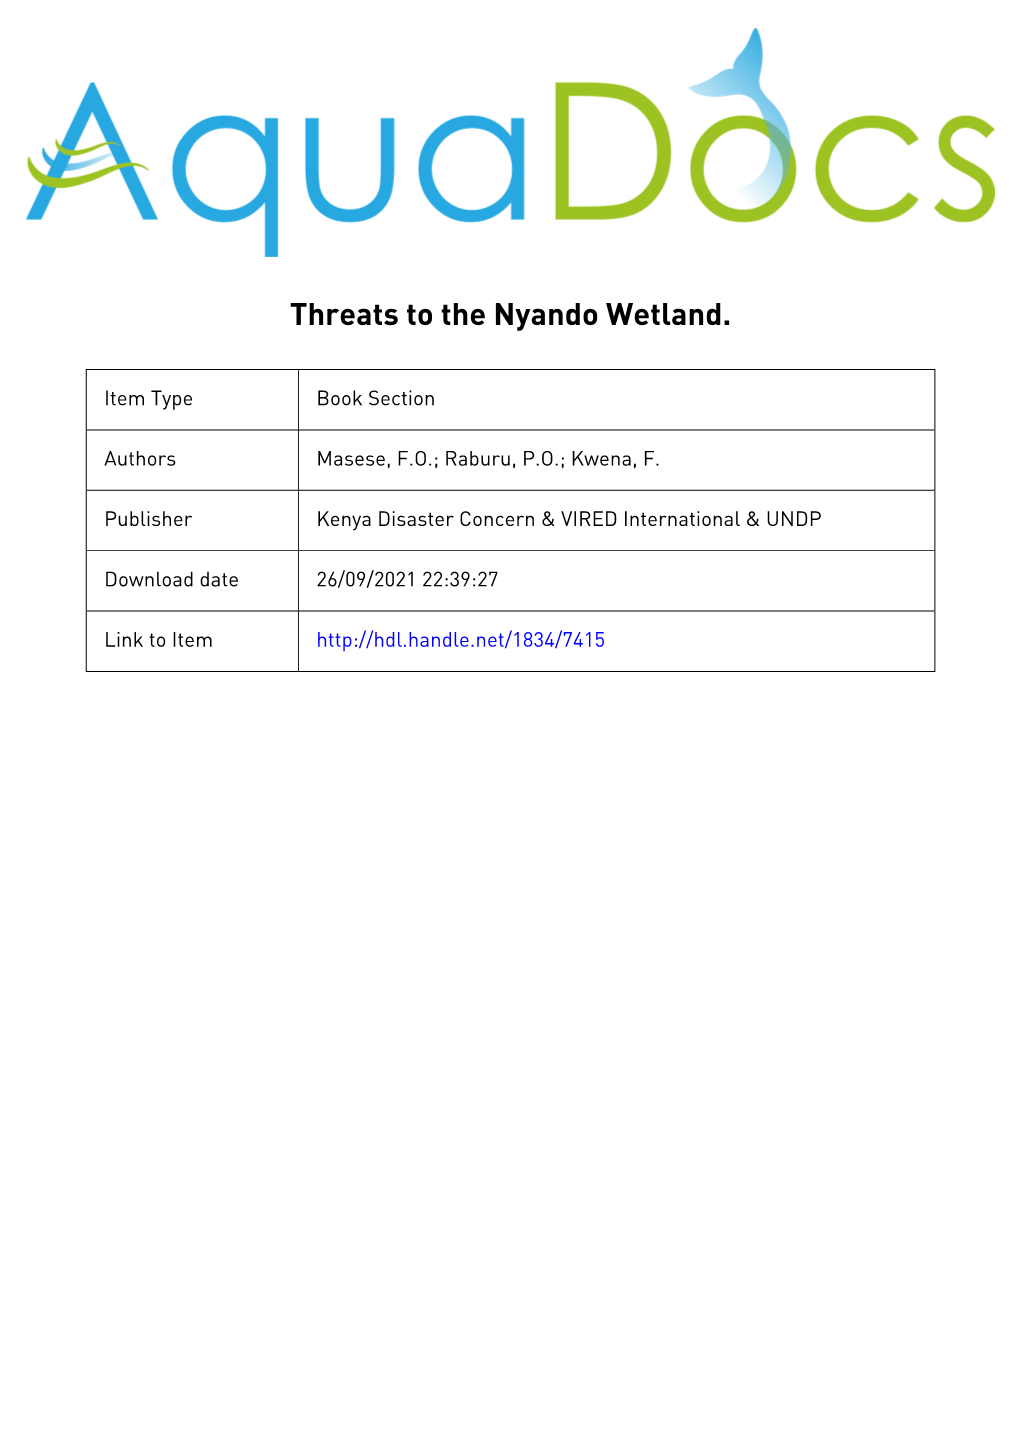 Threats to the Nyando Wetland CHAPTER 5